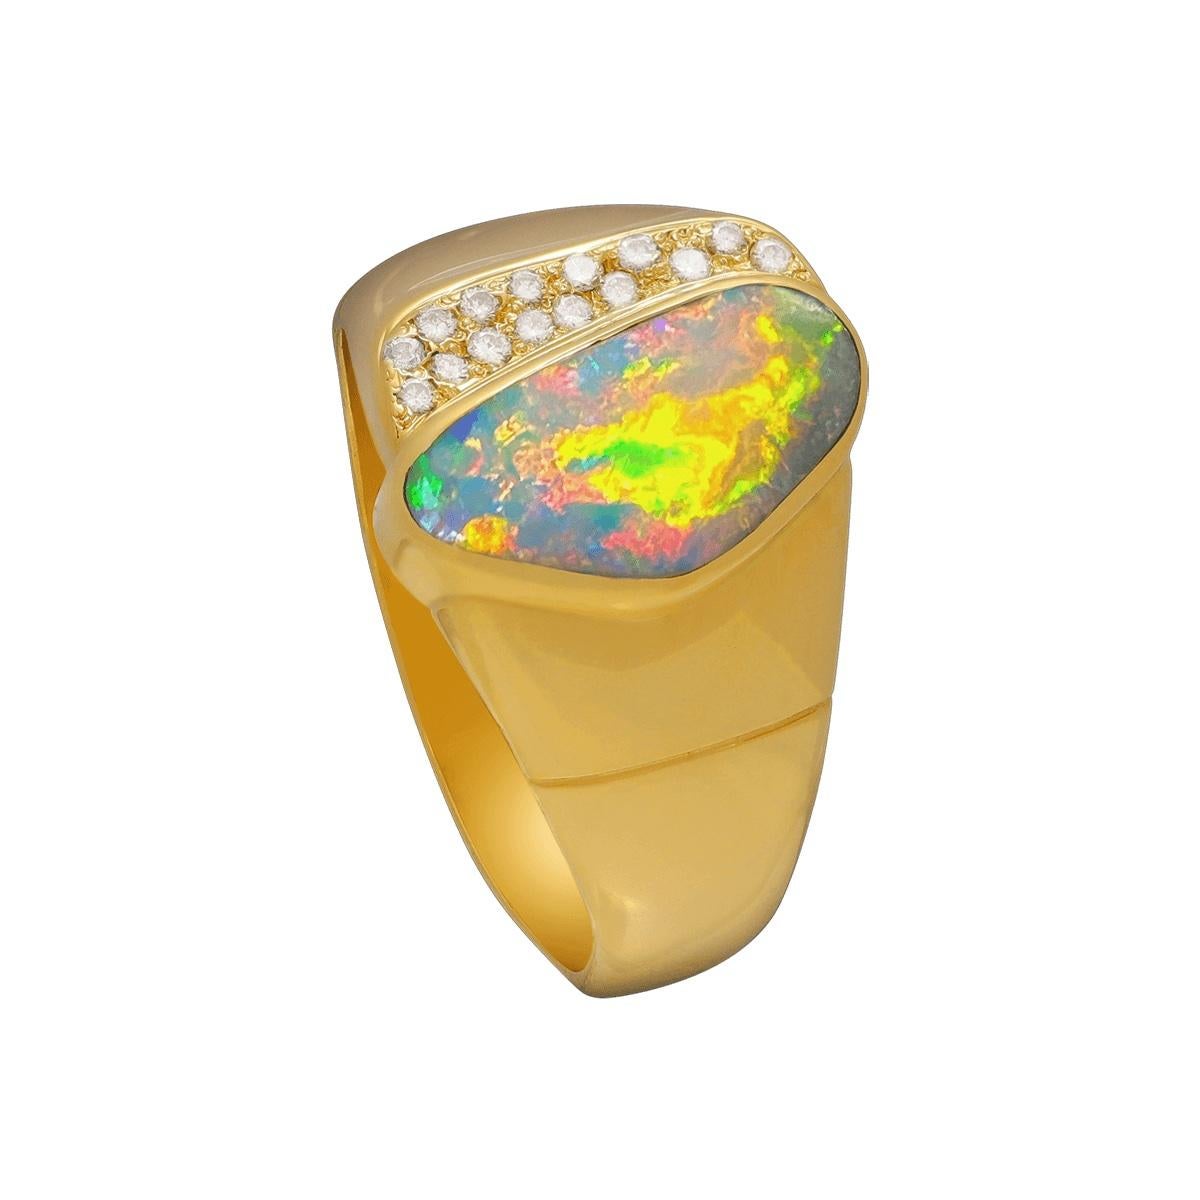 Cabochon Australian 3.36ct Crystal Opal, Diamond & 18K Gold Ring For Sale